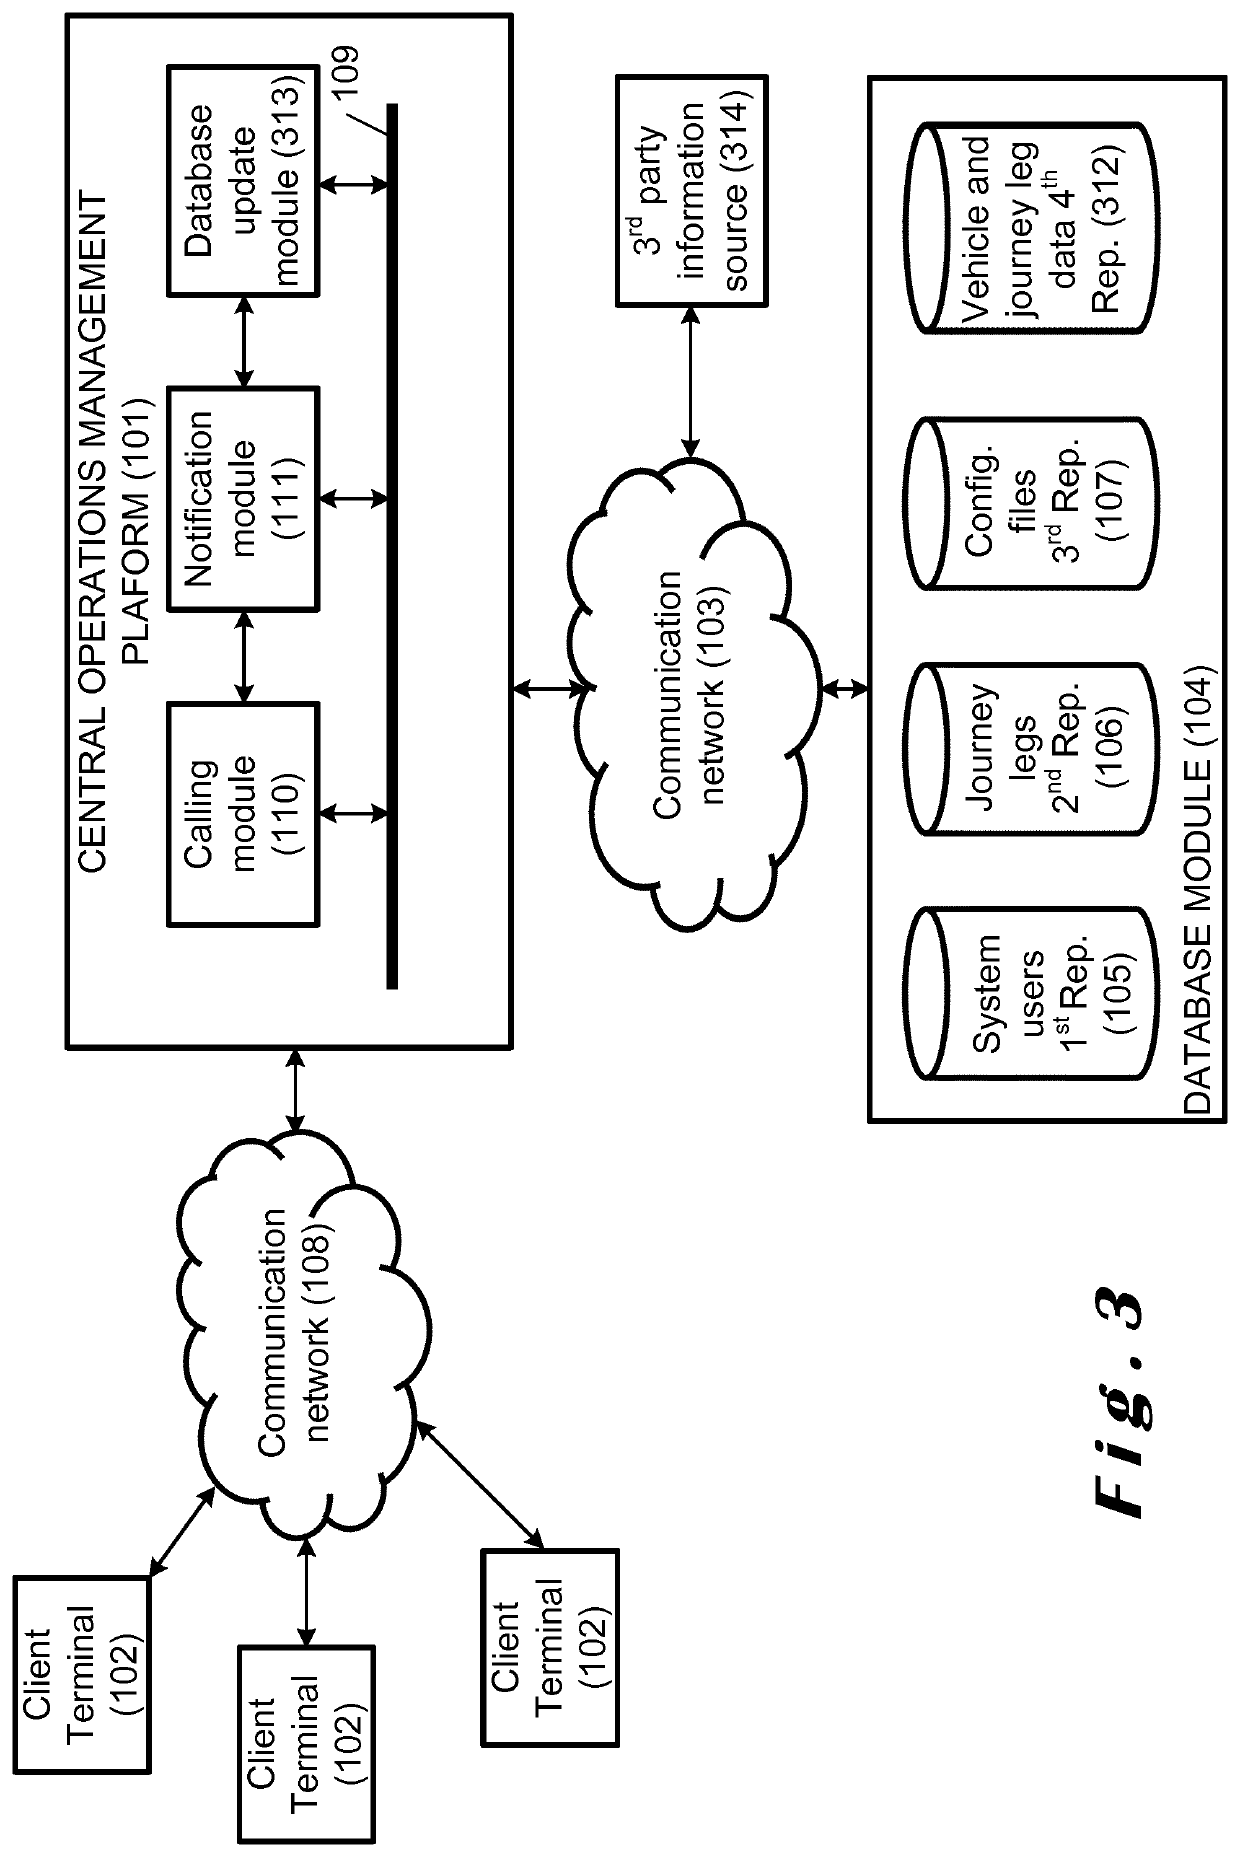 A system and a method for managing the operations of a commercial transportation vehicle